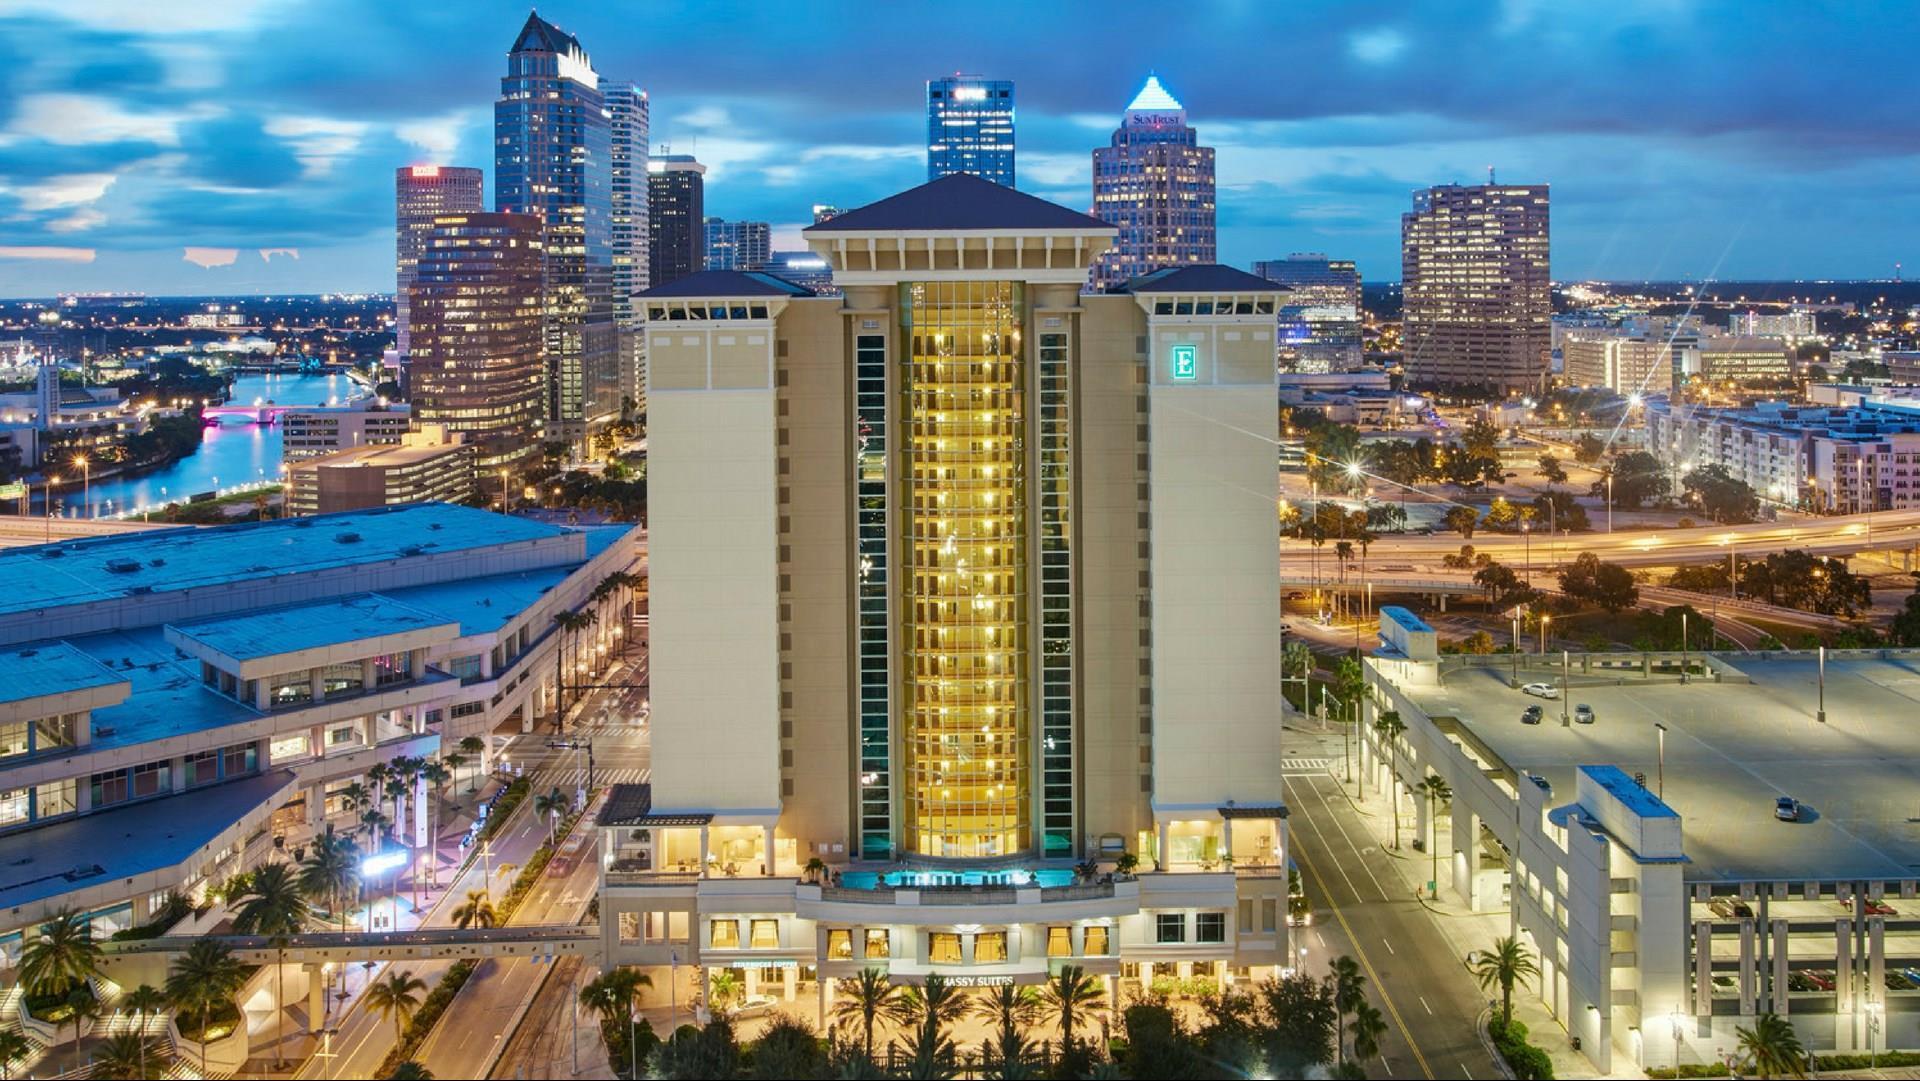 Embassy Suites by Hilton Tampa Downtown Convention Center in Tampa, FL